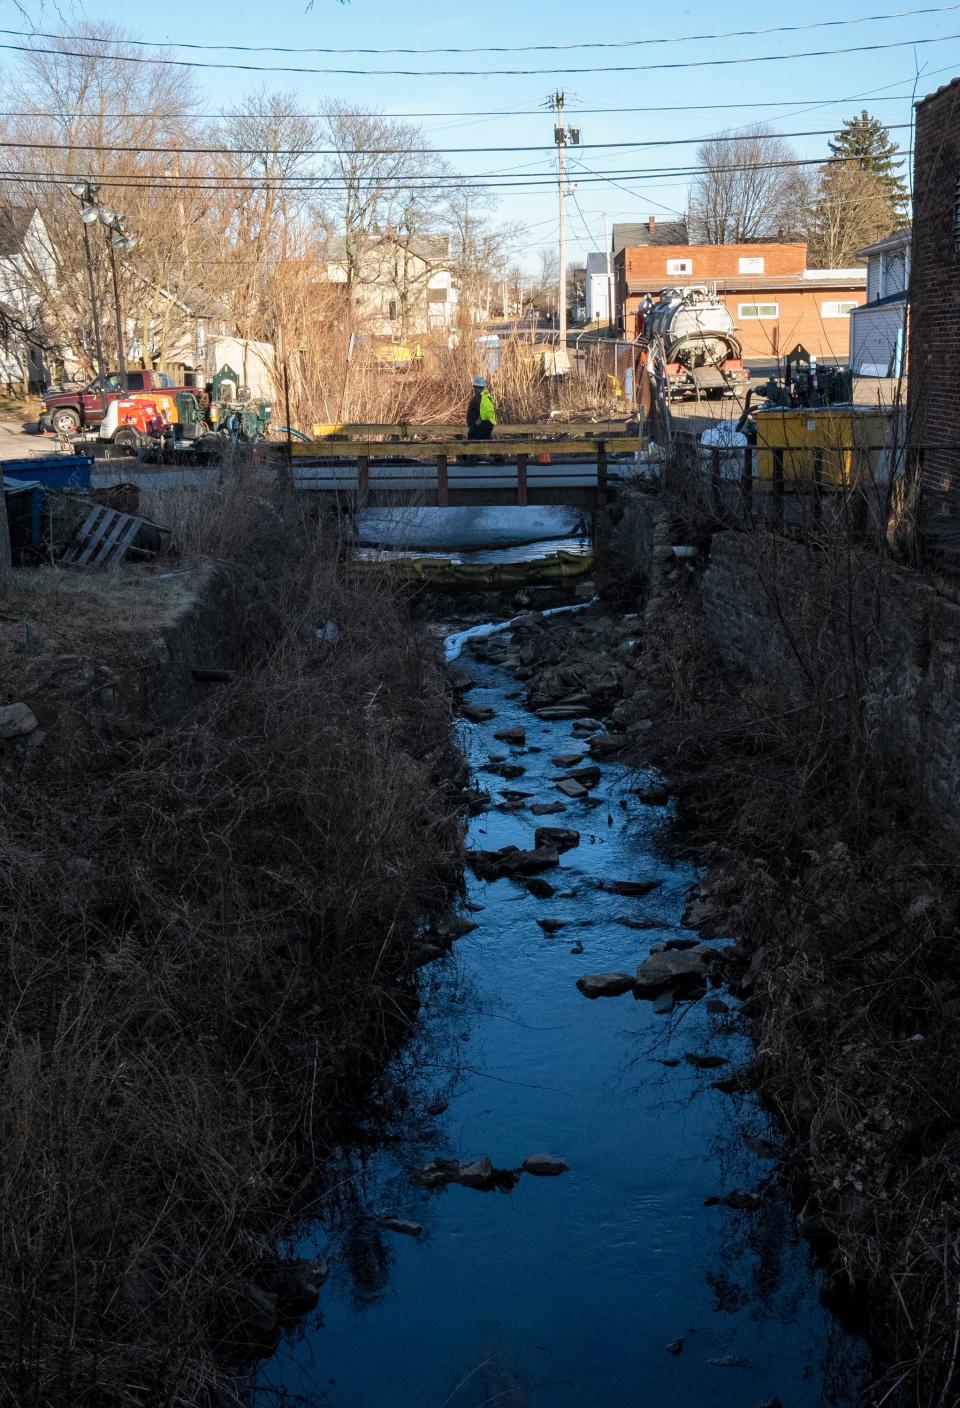 Feb 21, 2023; East Palestine, Ohio, USA; Workers pump water into a creek that runs through East Palestine. Mandatory Credit: Brooke LaValley/Columbus Dispatch